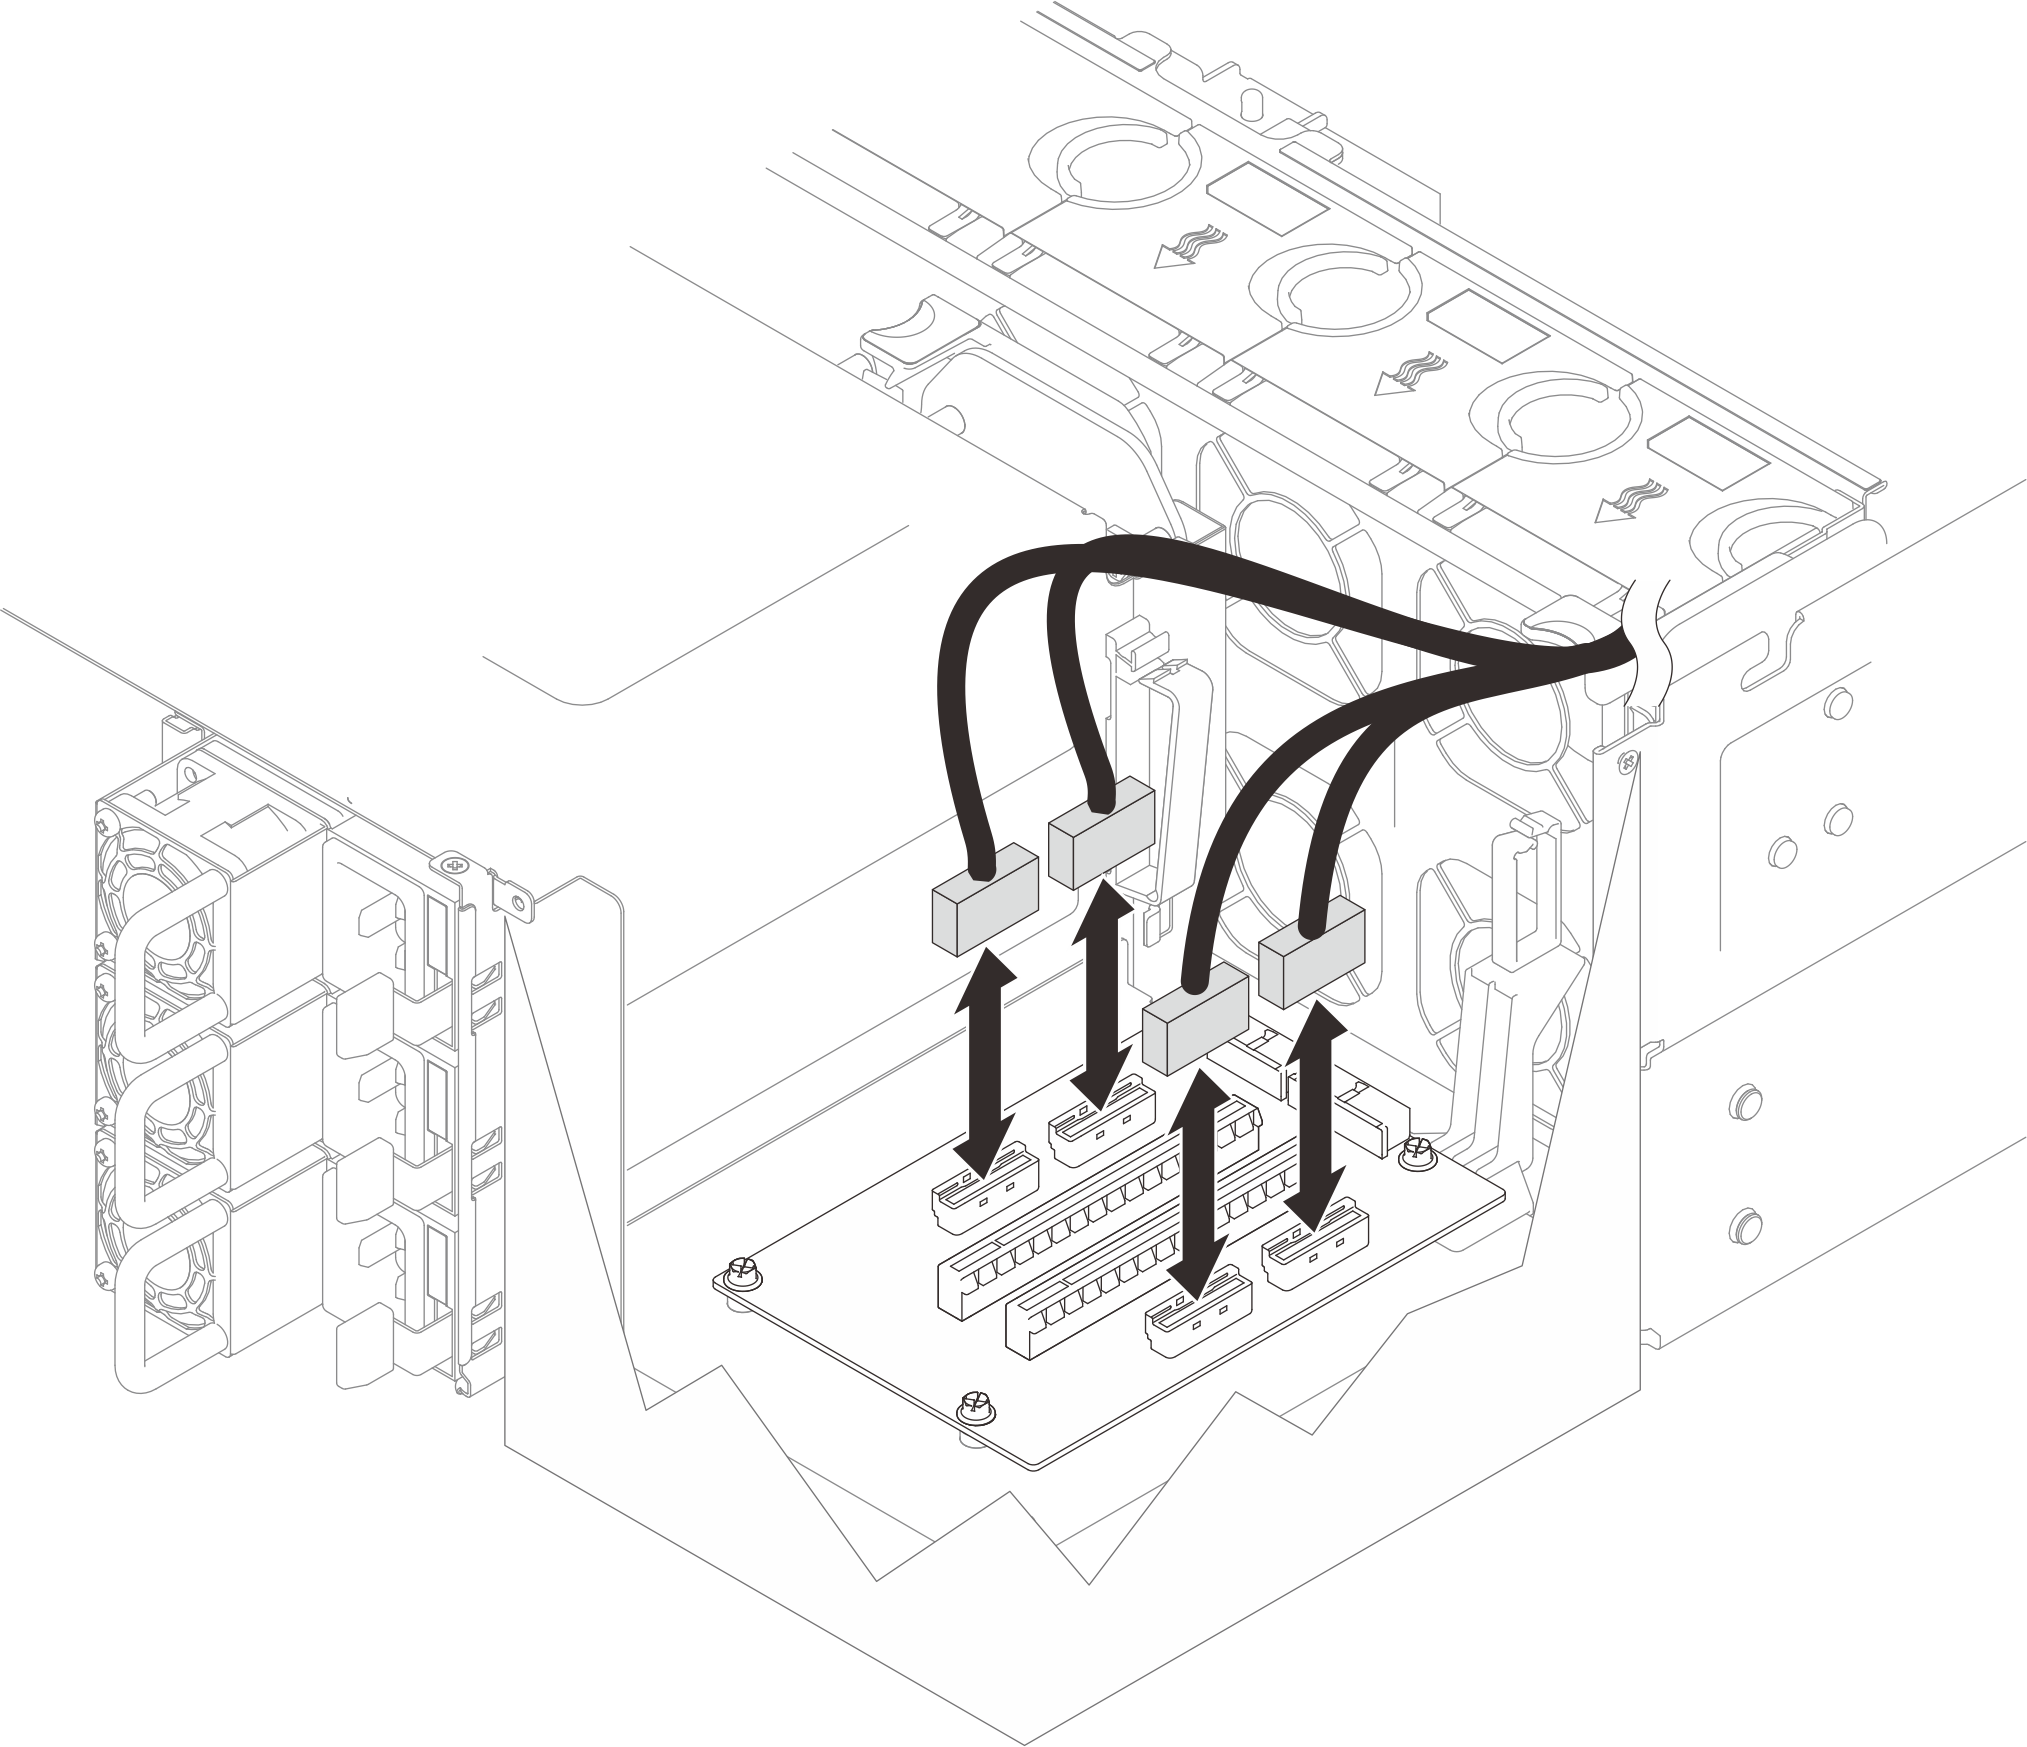 Connecting PCIe riser cables